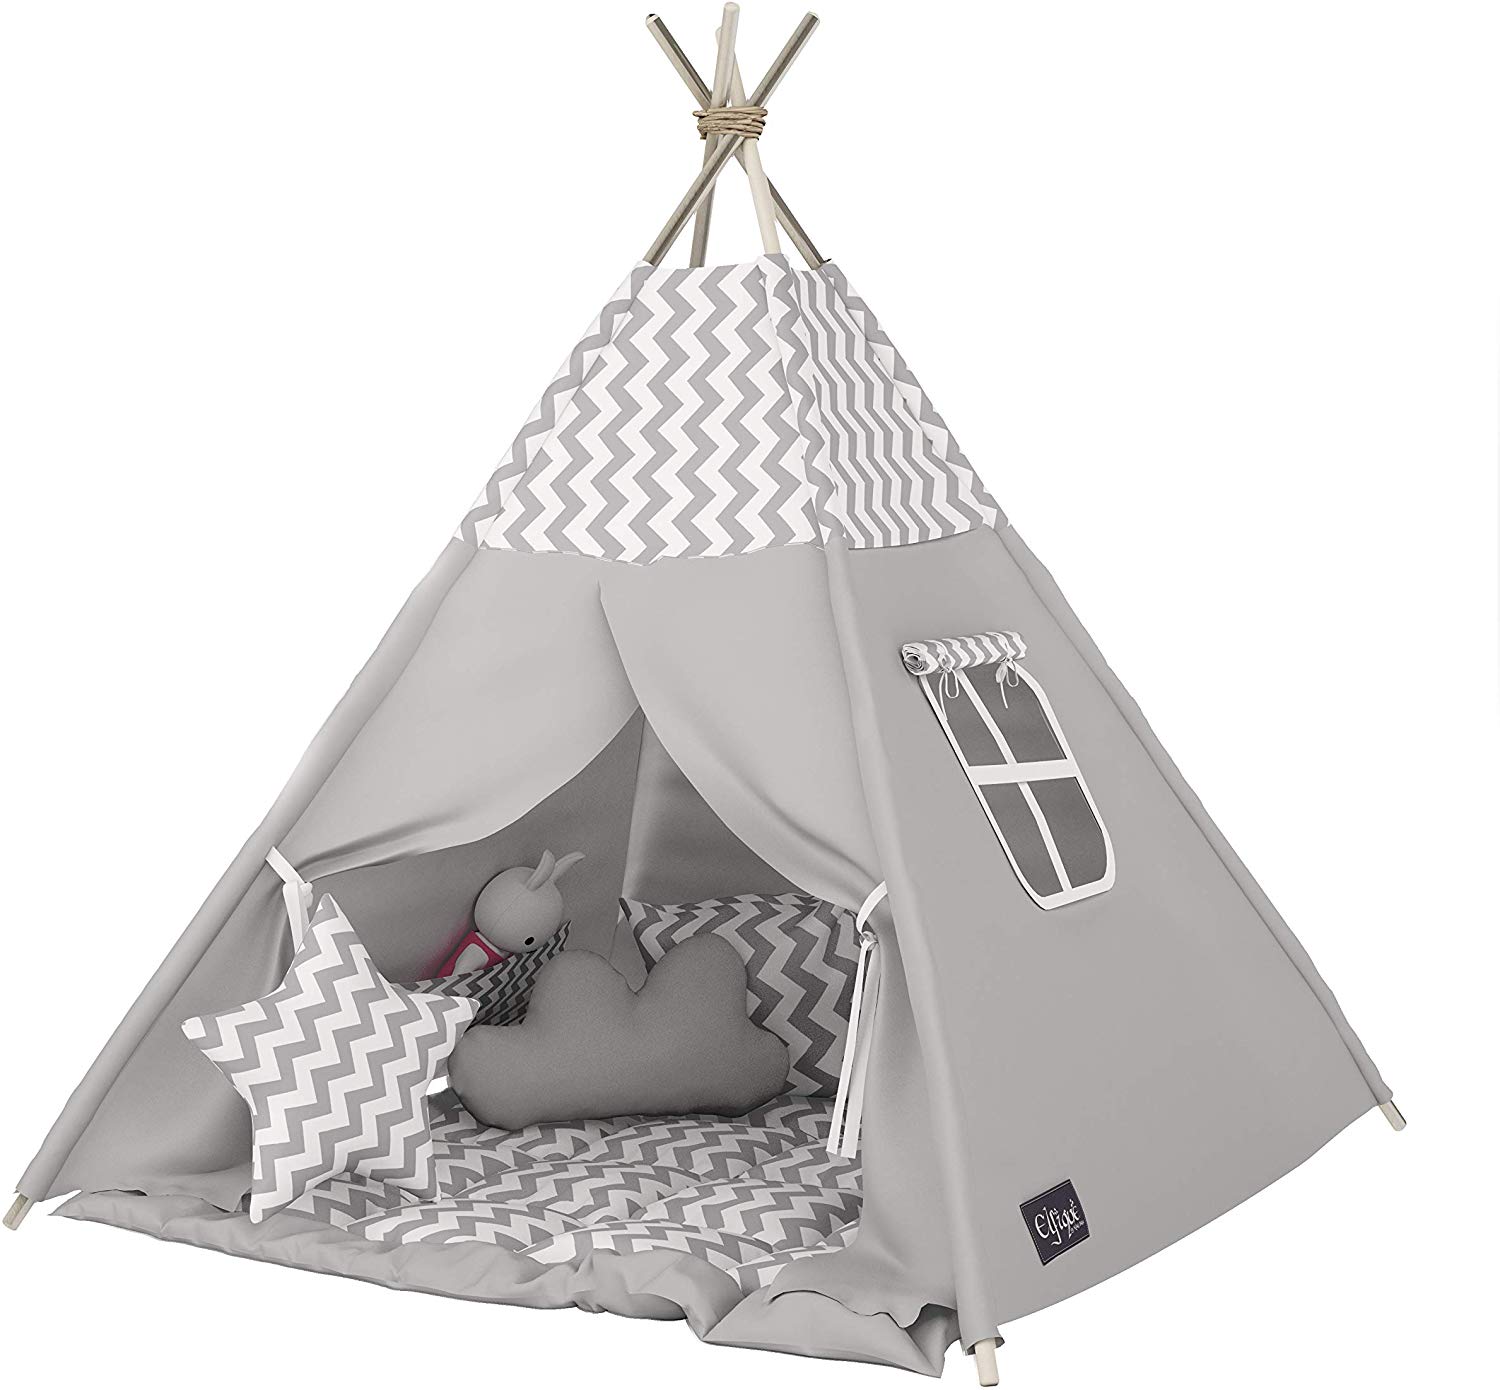 Elfique New Tipi Indian Tent Play Tent Double Padded Blanket